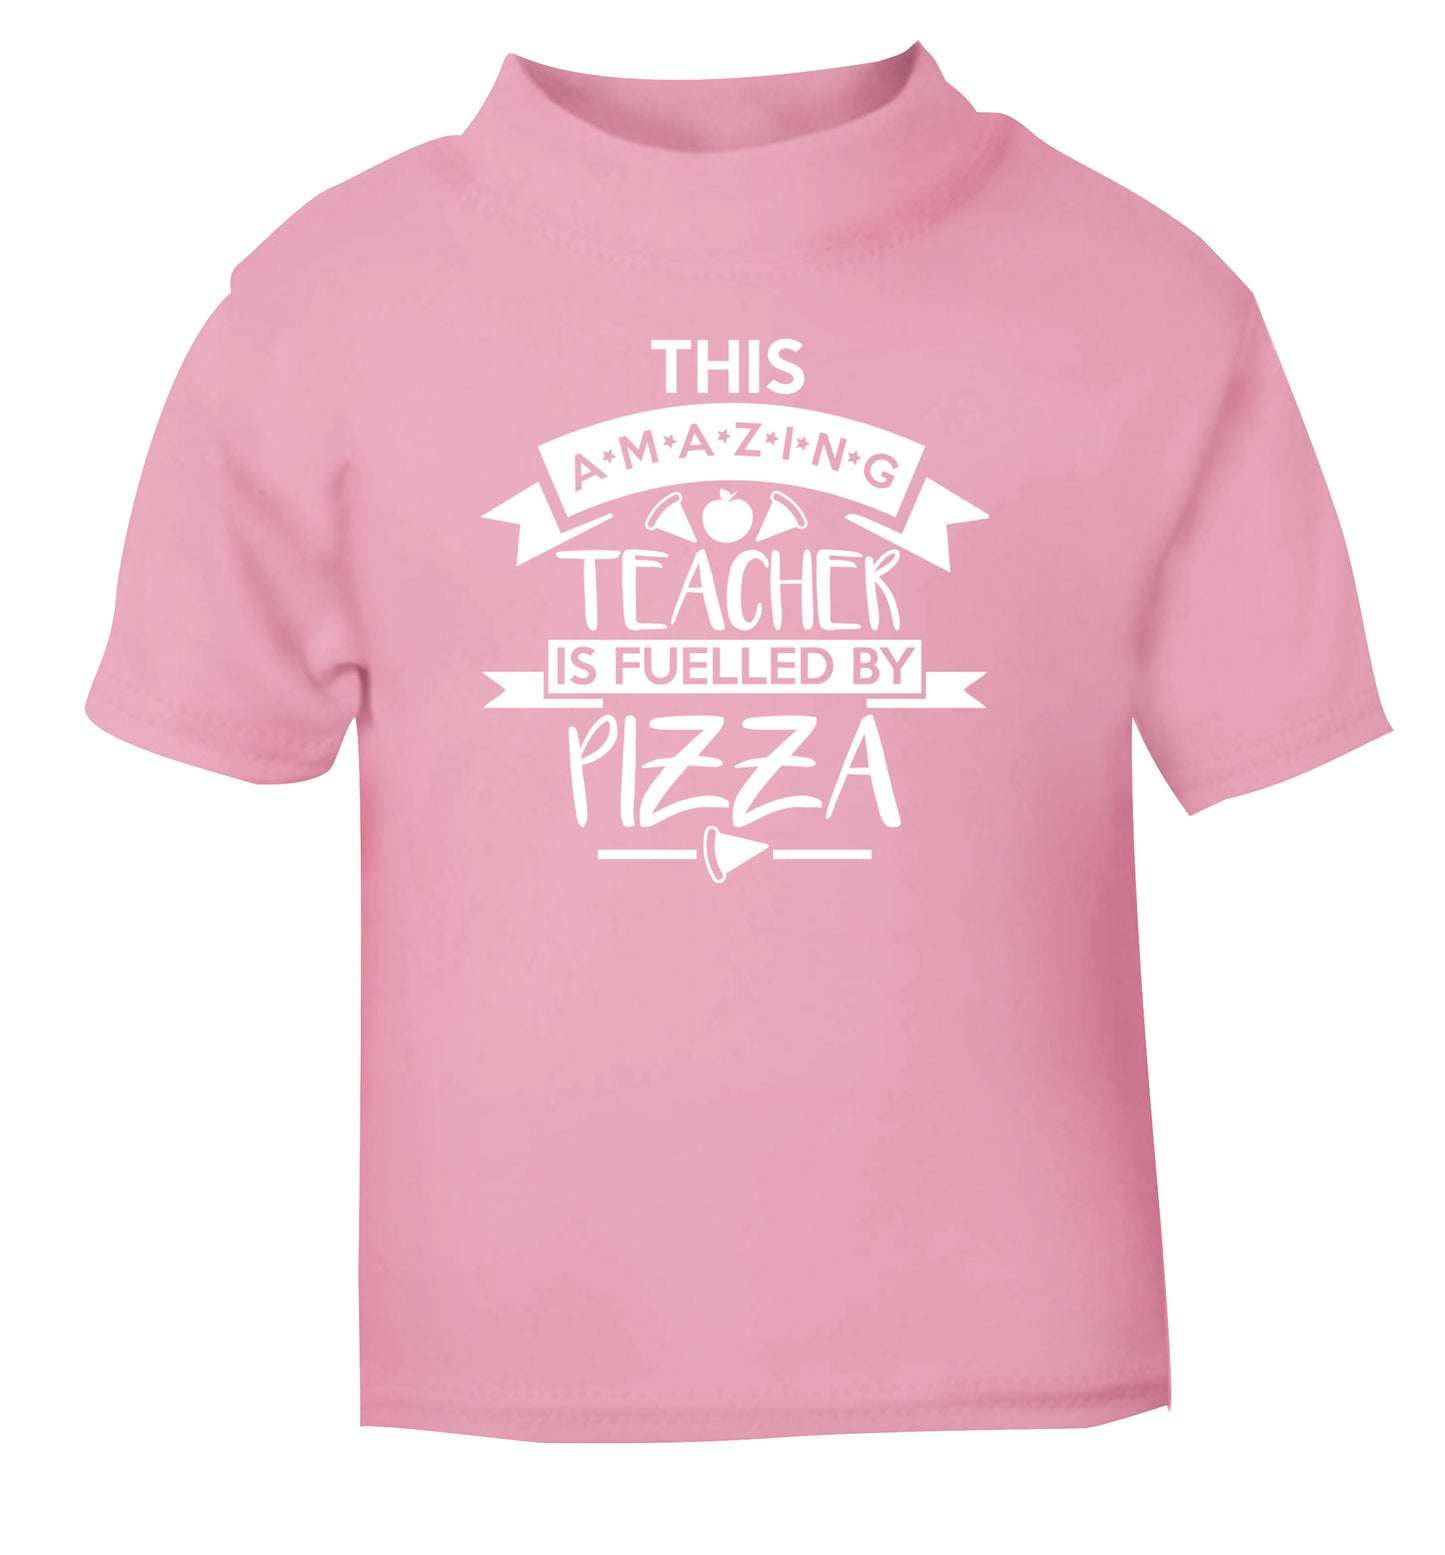 This amazing teacher is fuelled by pizza light pink Baby Toddler Tshirt 2 Years